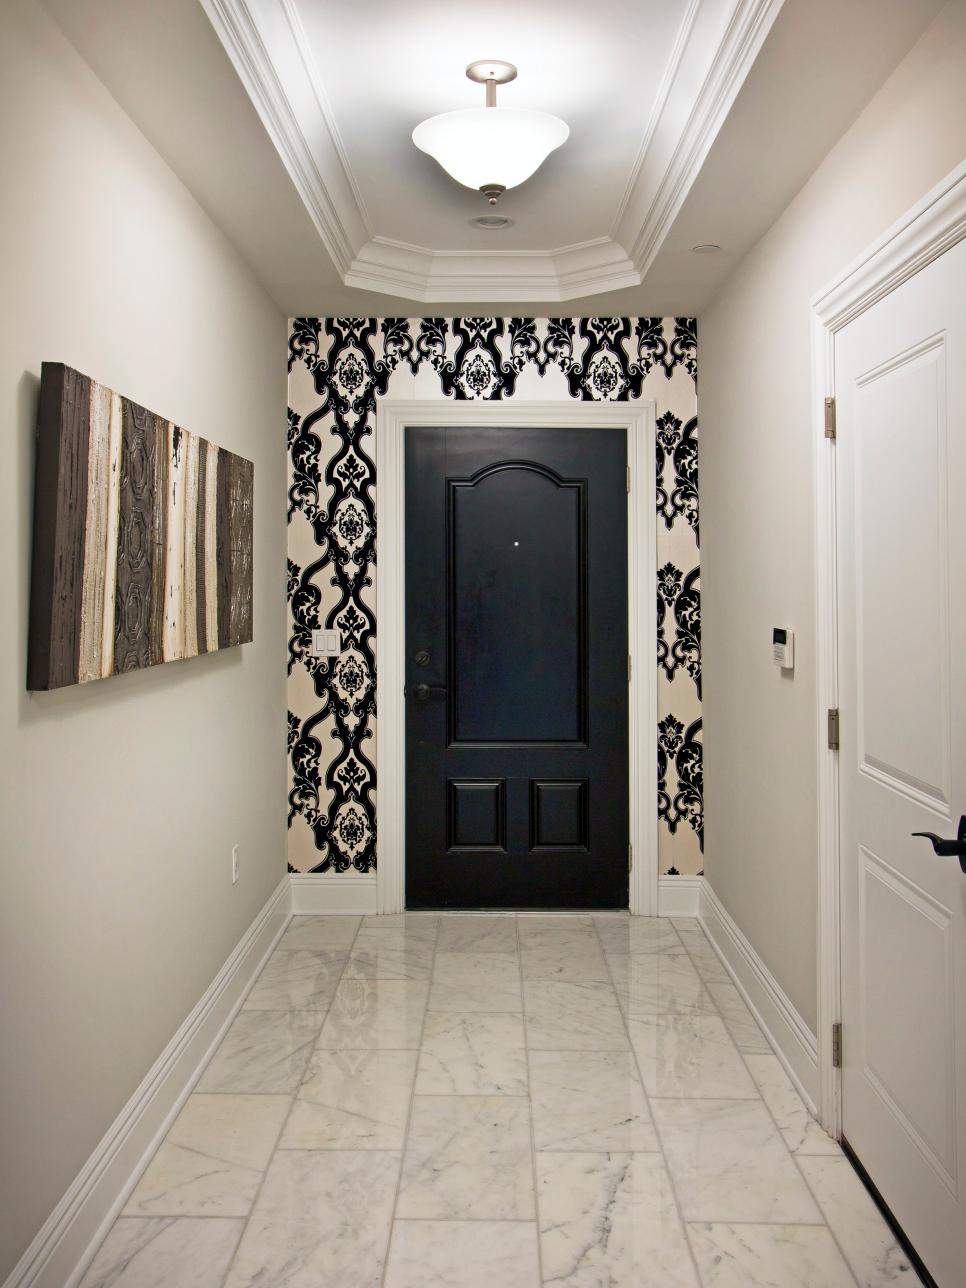 Black-and-White Entryway With Patterned Wallpaper and Marble Floor